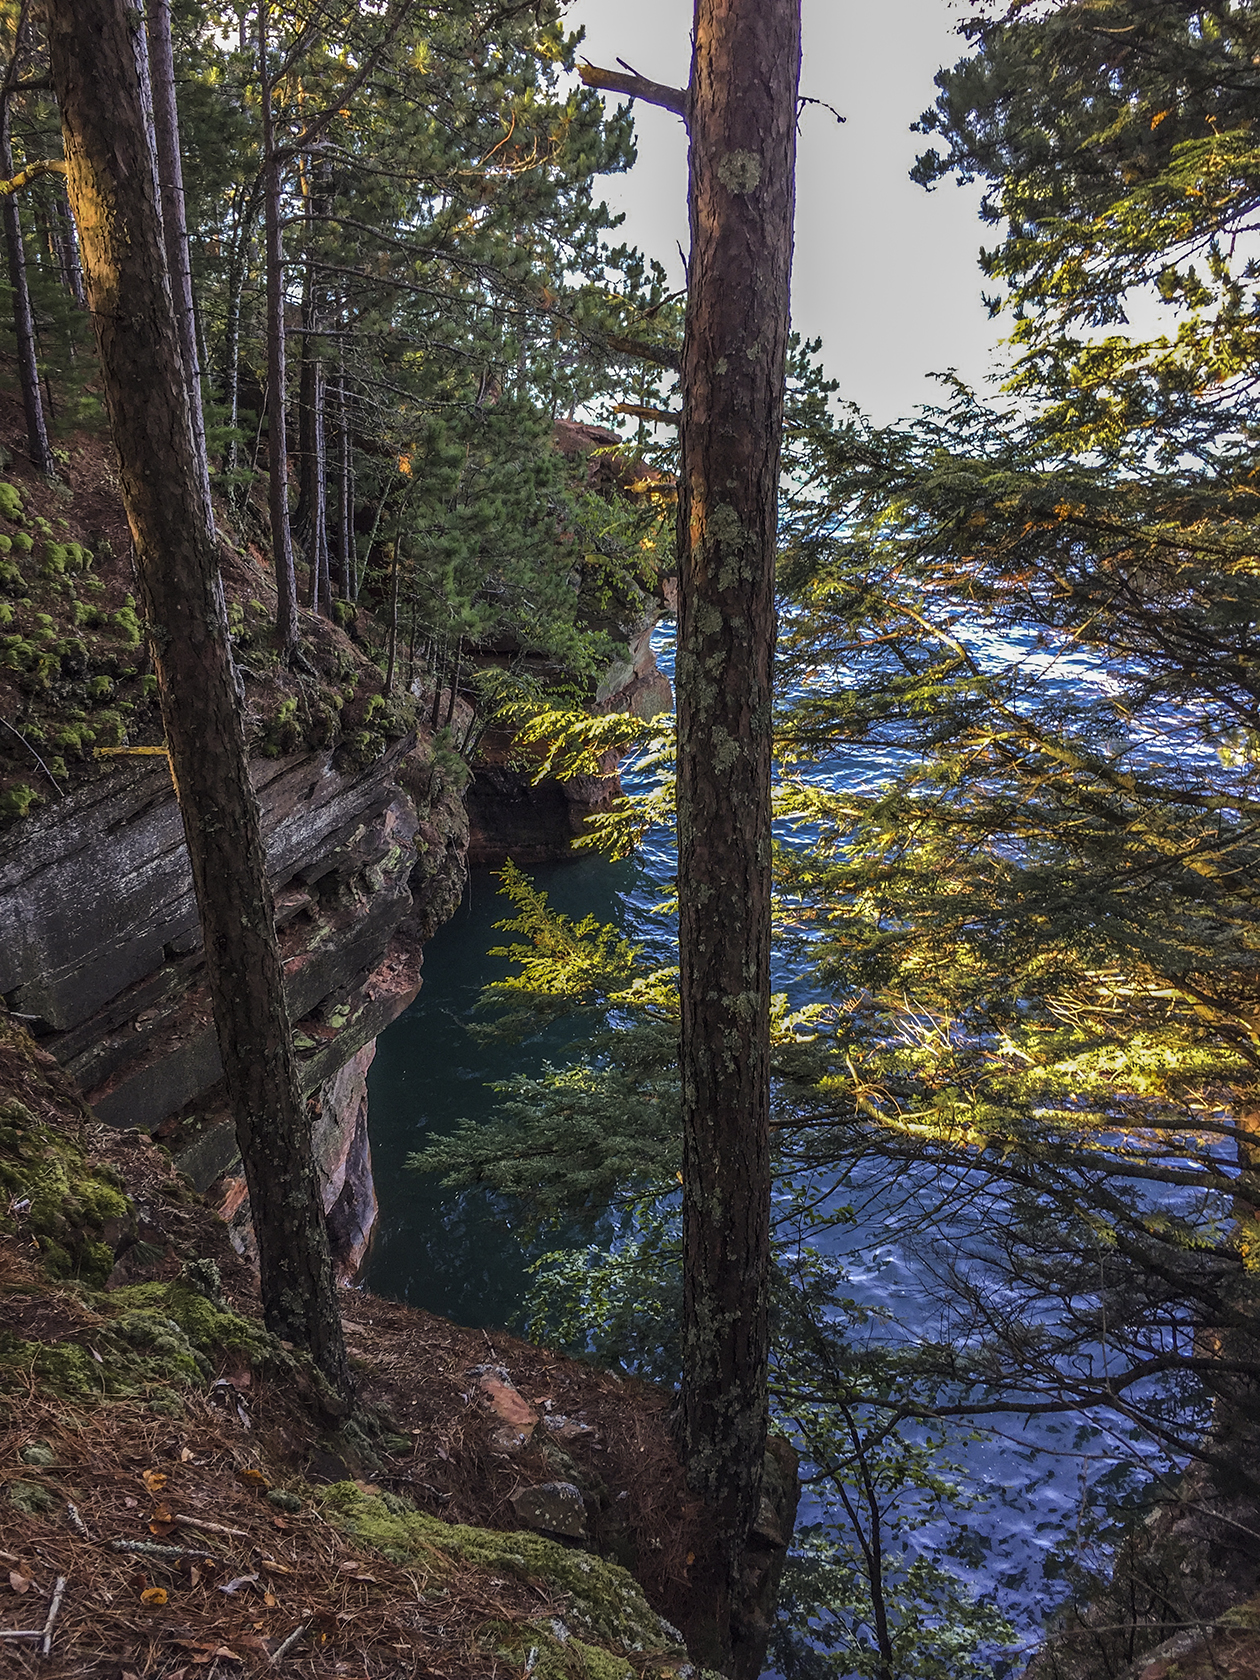 The Lakeshore Trail at the Apostle Islands National Lakeshore